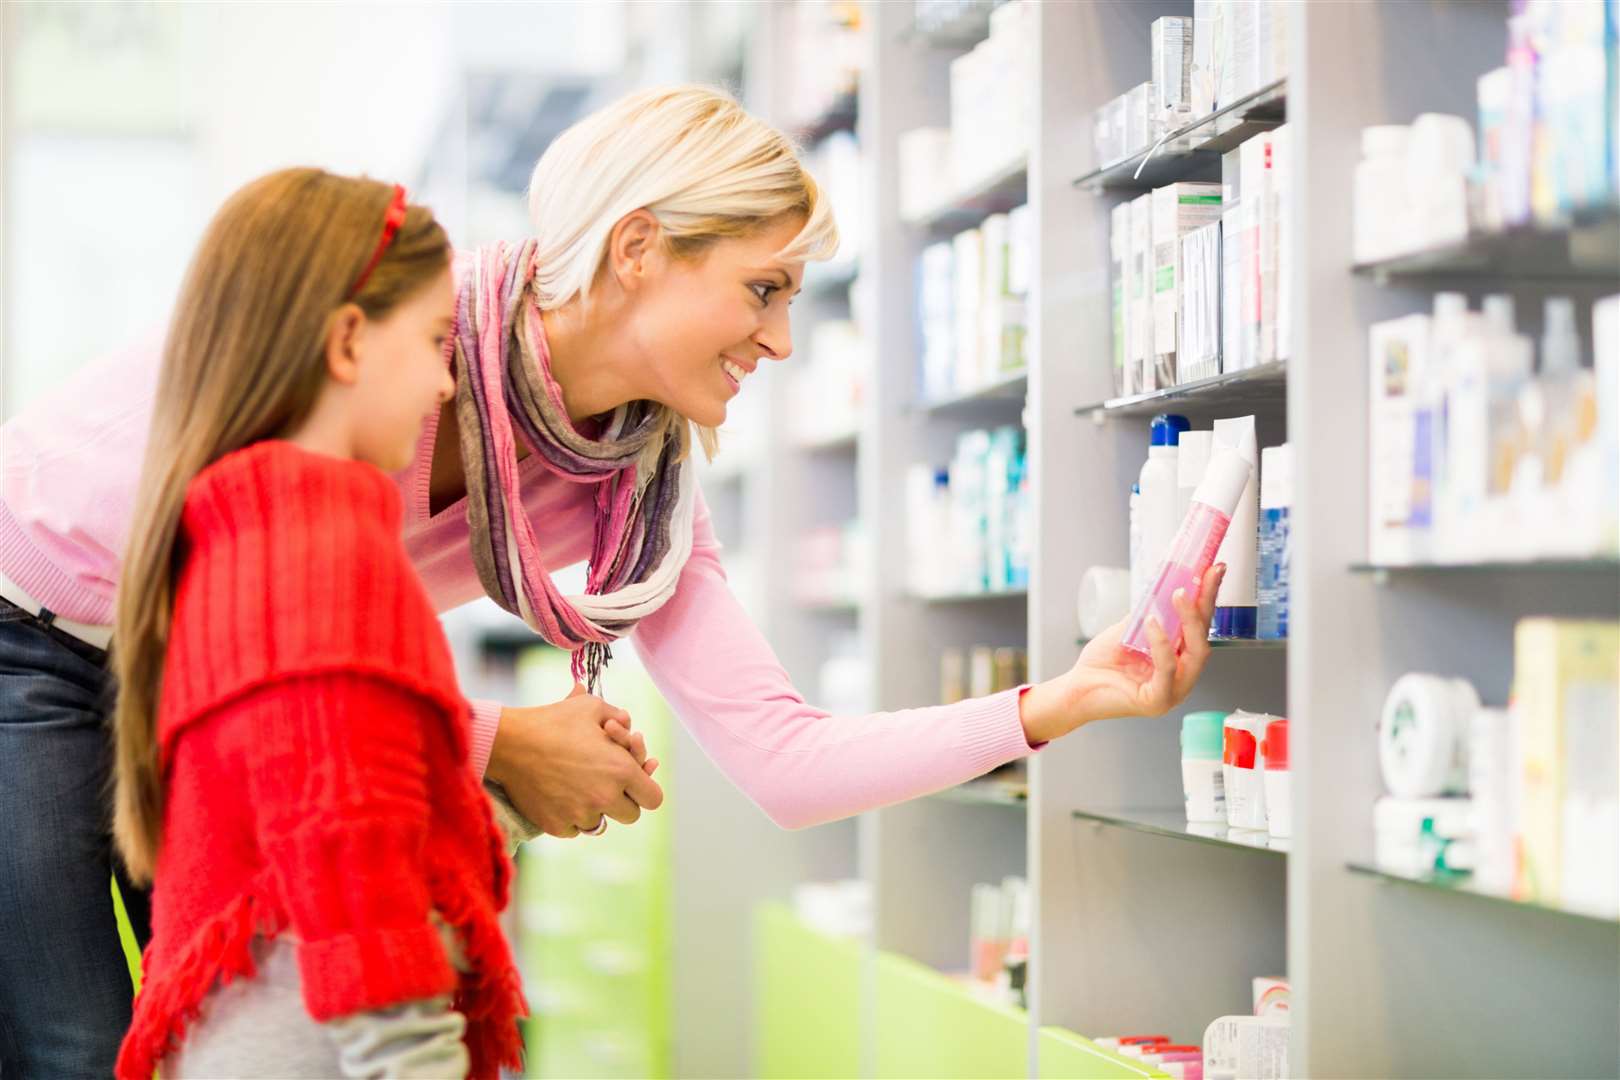 Children do not have to pay for NHS prescriptions. Image: iStock.